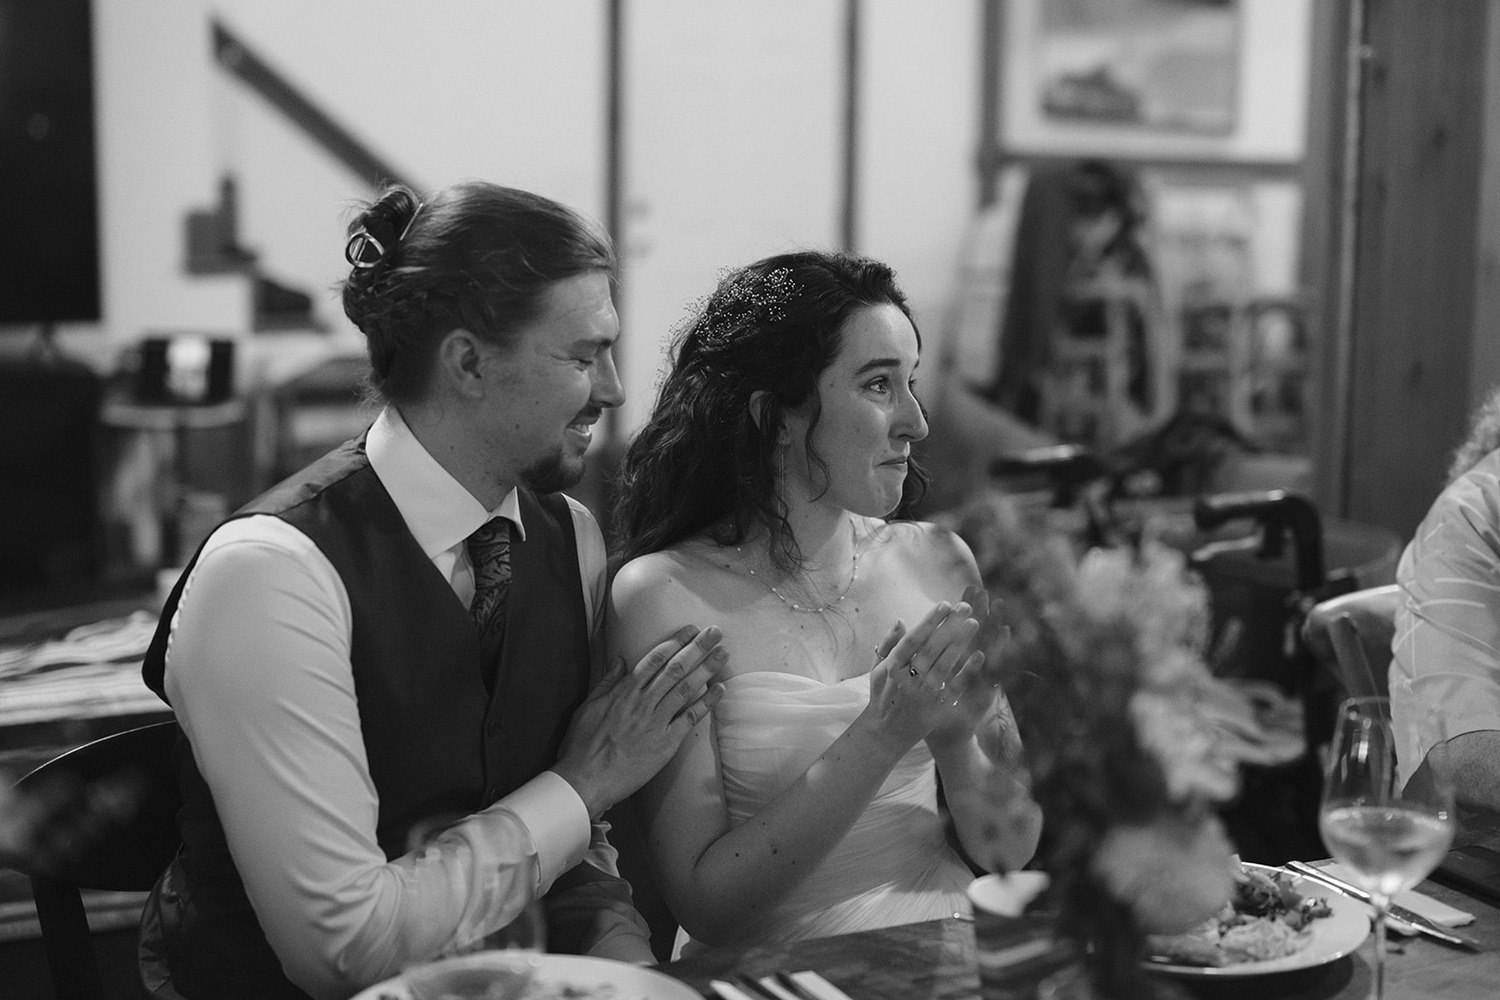 A bride and groom sit together at a reception table, smiling and applauding. The bride, in a strapless dress, looks touched and emotional, while the groom, wearing a vest and tie, gently places his hand on her shoulder. The setting is warm and intimate, with food and wine on the table.